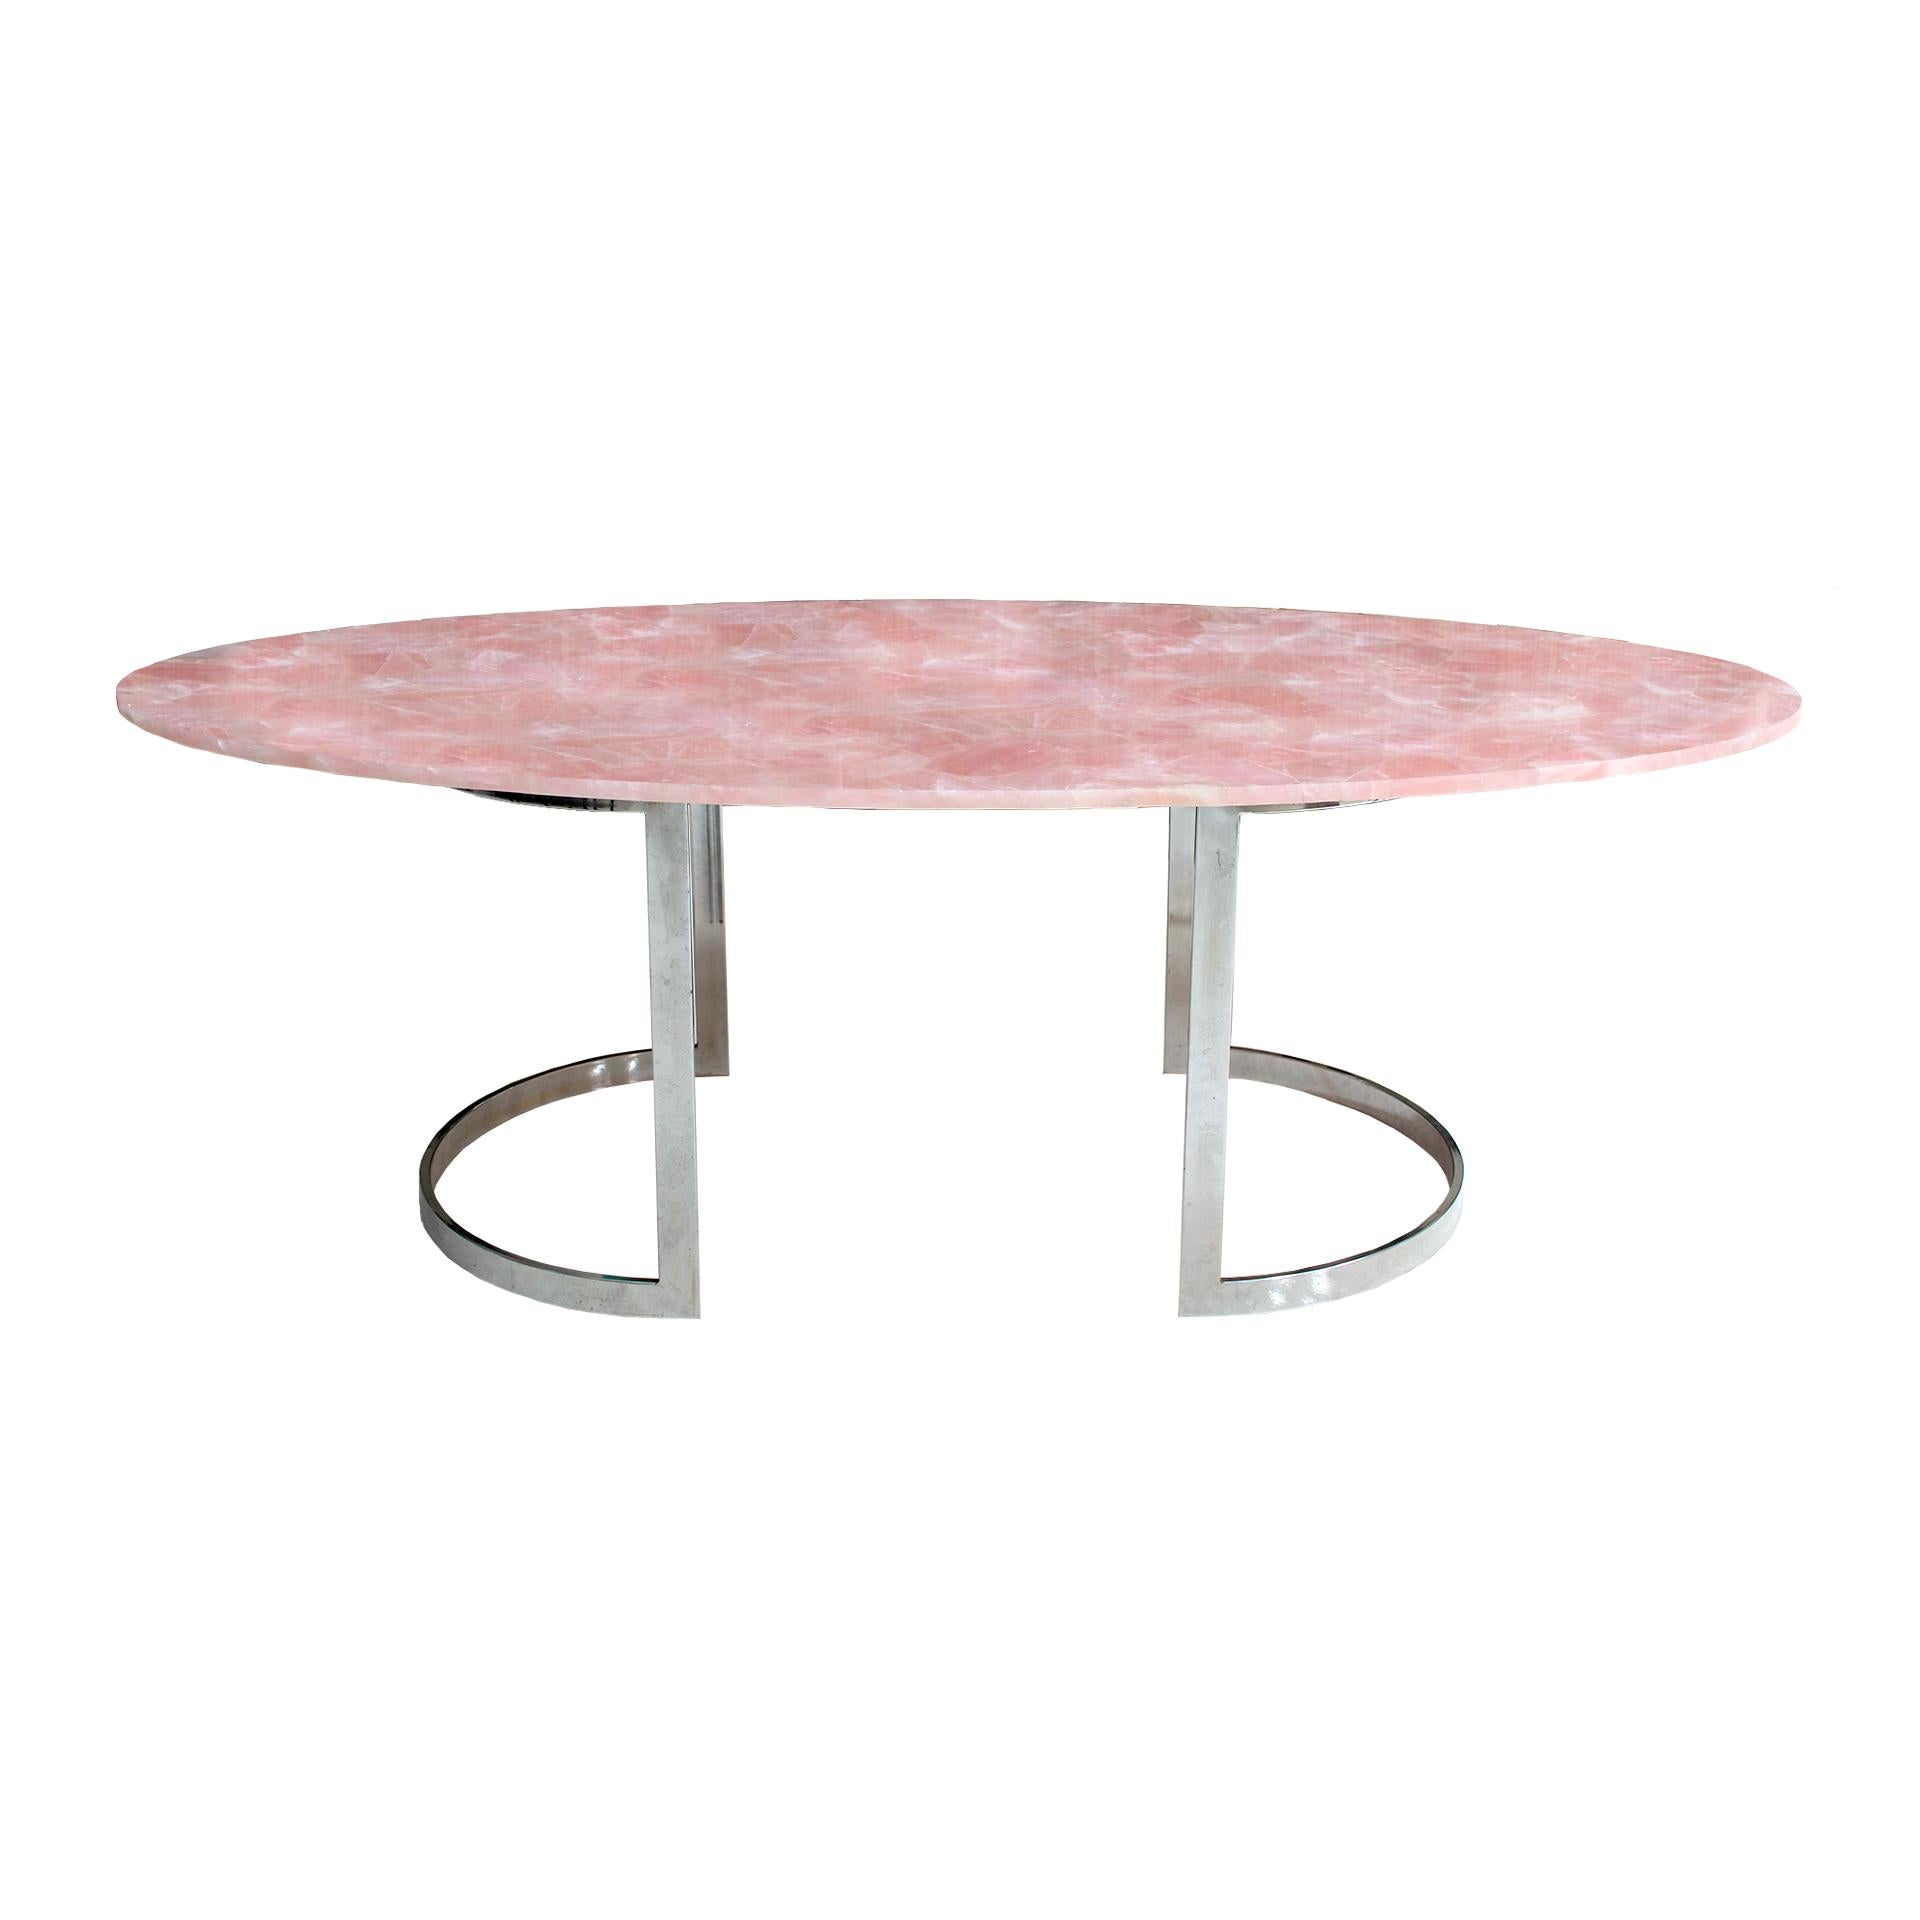 Dining table designed by L.A. Studio composed of two sculptural curved bases made of steel and oval marquetery of rose quartz. This table is up to eight people.

Our main target is customer satisfaction, so we include in the price for this item